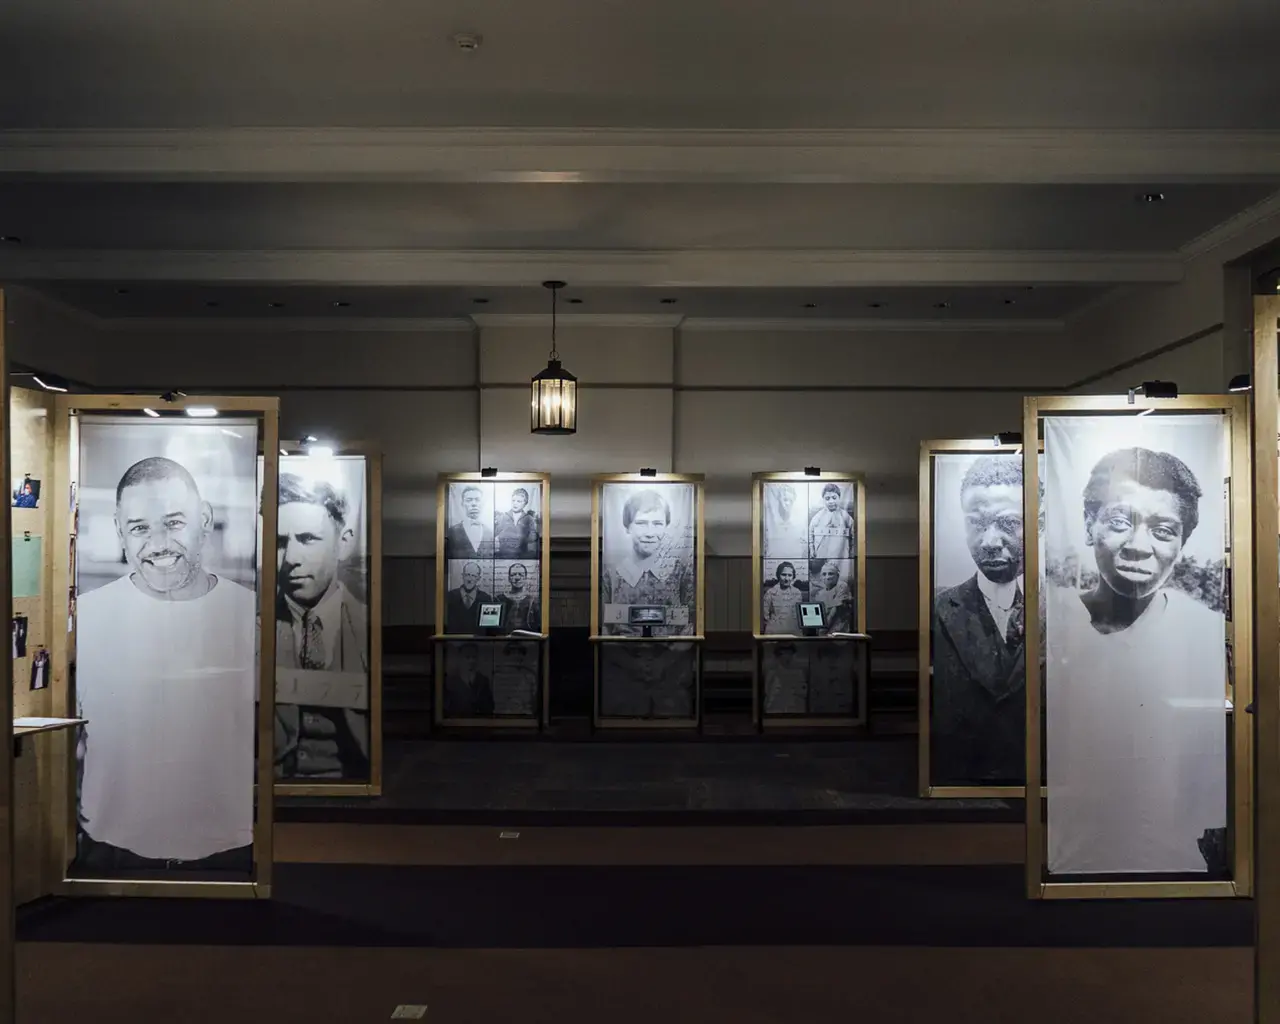 Six, larger than life-sized portraits of men and women line either side of a carpeted room. The images are printed on fabric and hung from wooden frames. In the back of the room, three additional wooden frames; the center frame contains a portrait, and the frames on either side of the portrait contain a grid of six images each and abstracted archival text. All but two of the portraits in the room are archival.